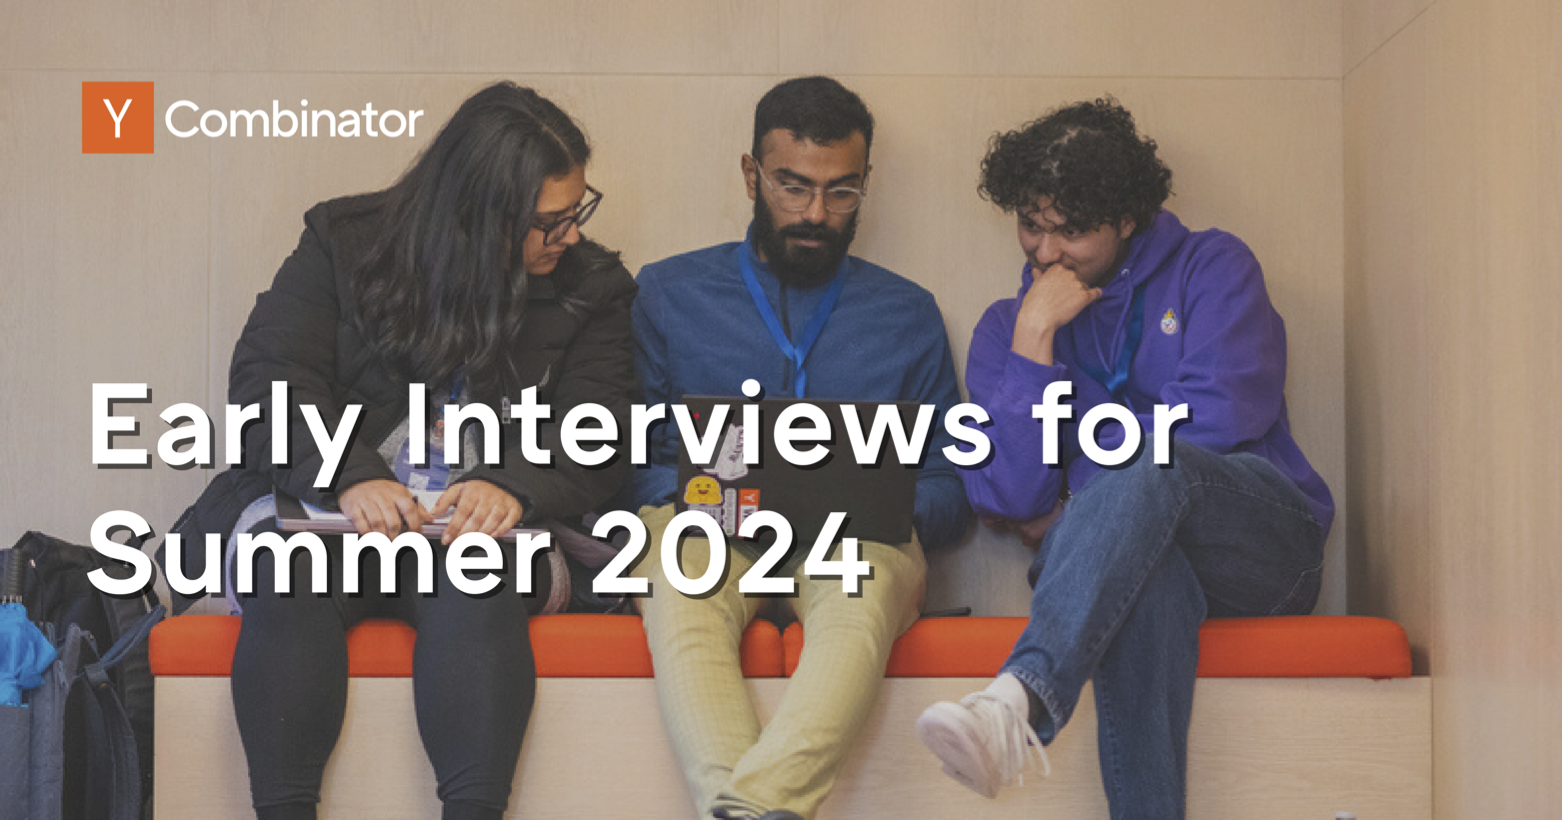 One-off Early Interviews for Summer 2024 - Apply by Feb 21st